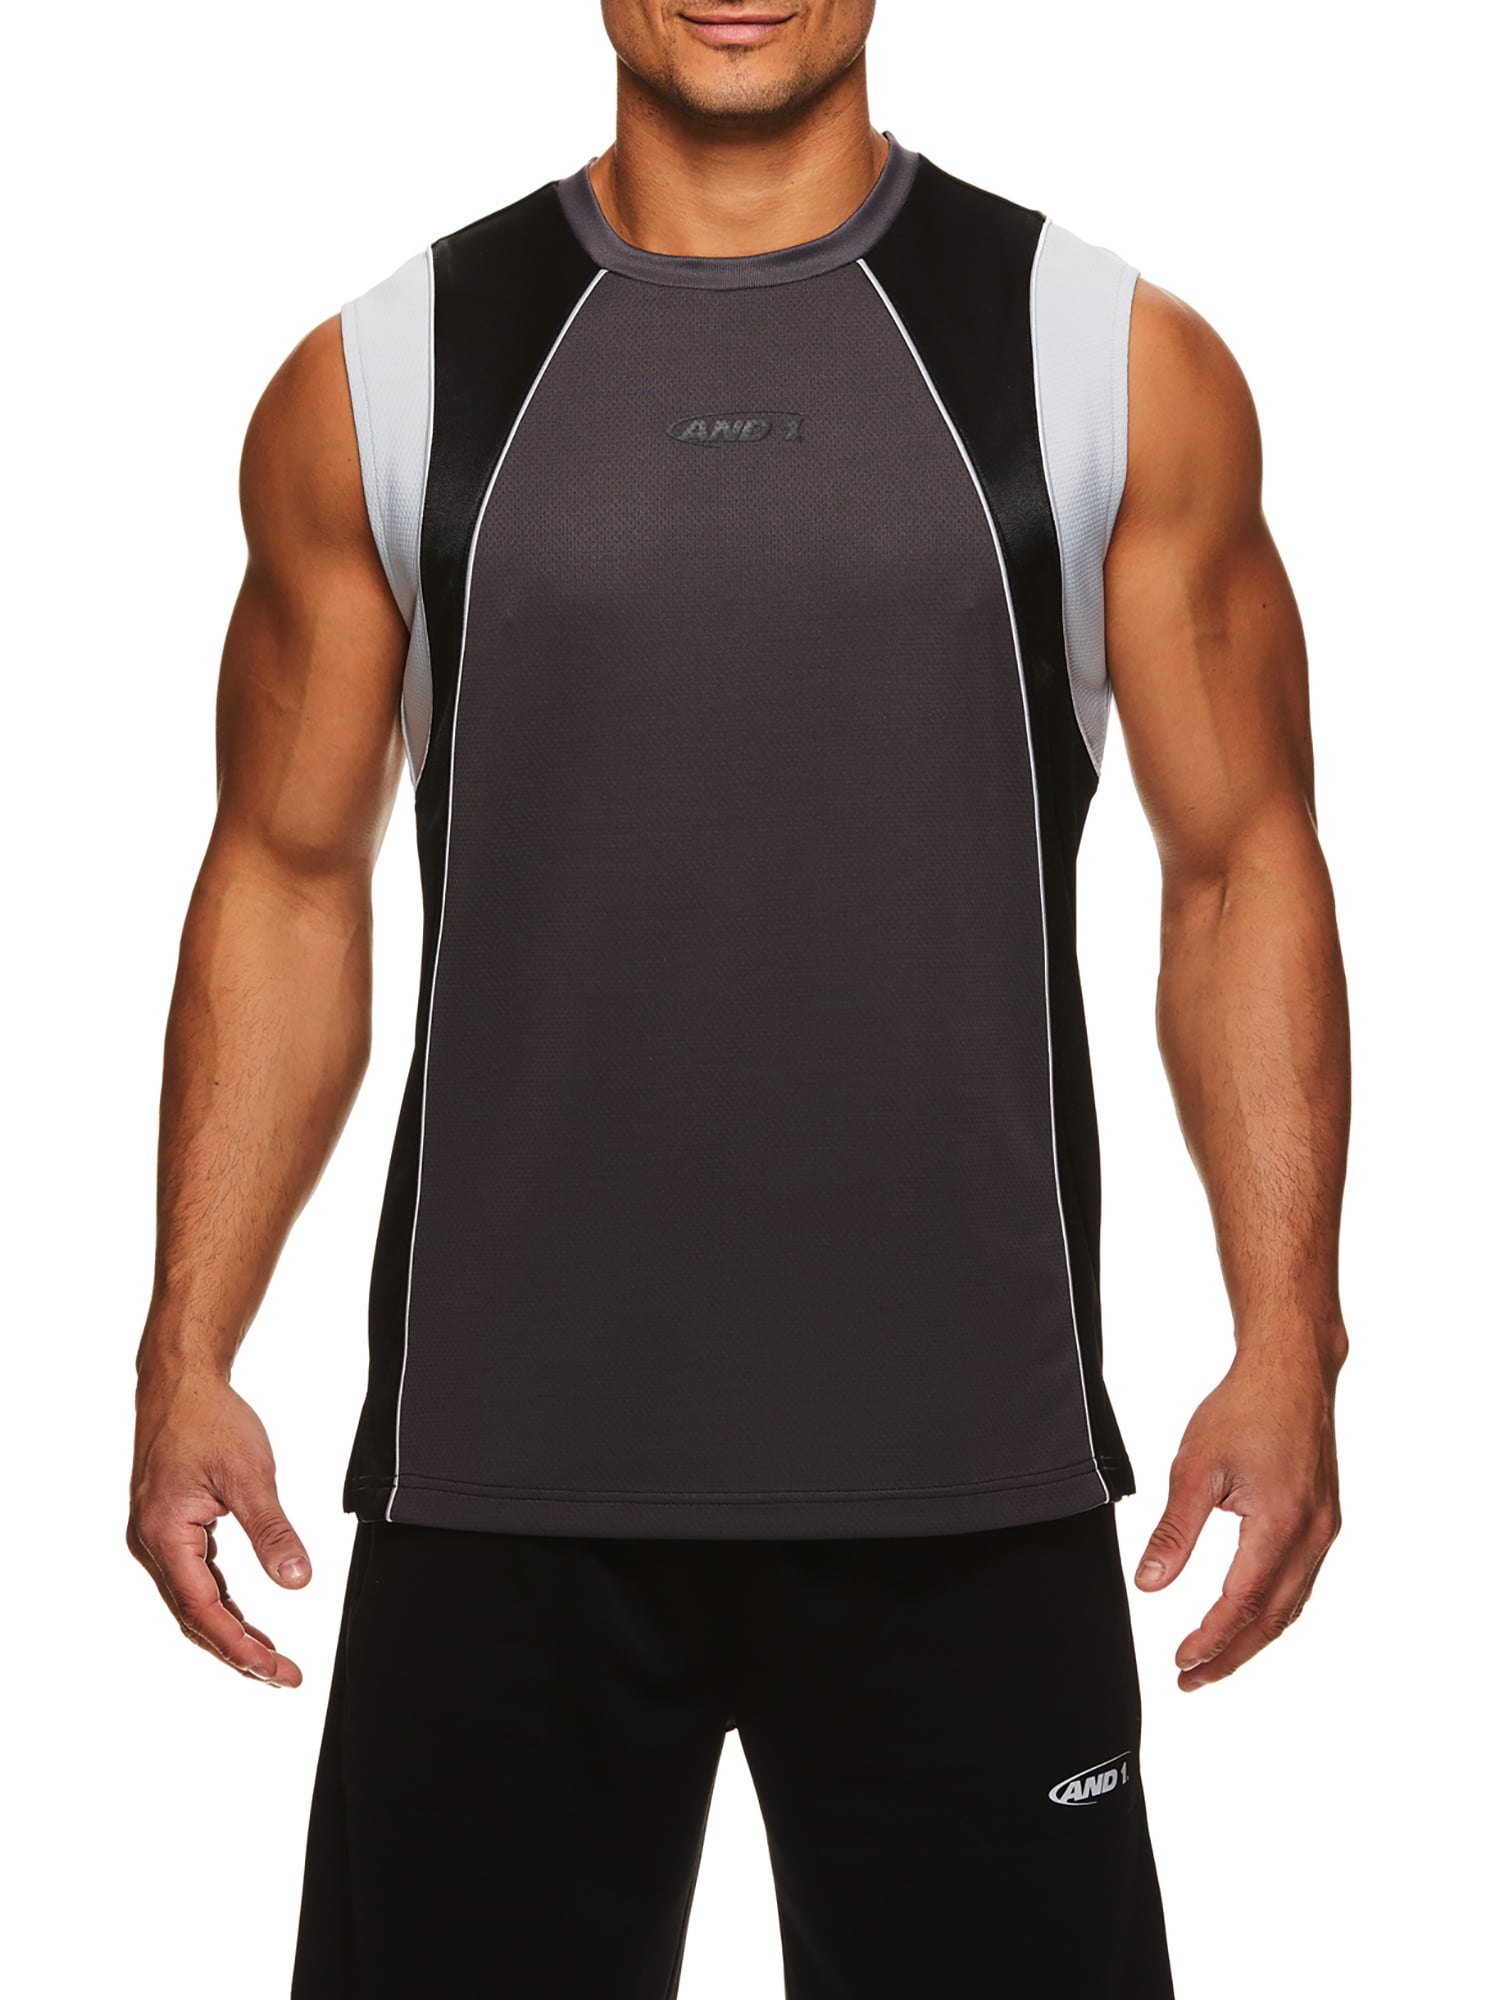 AND1 Men's Exile Sleeveless Jersey Tank Top, up to 2XL 